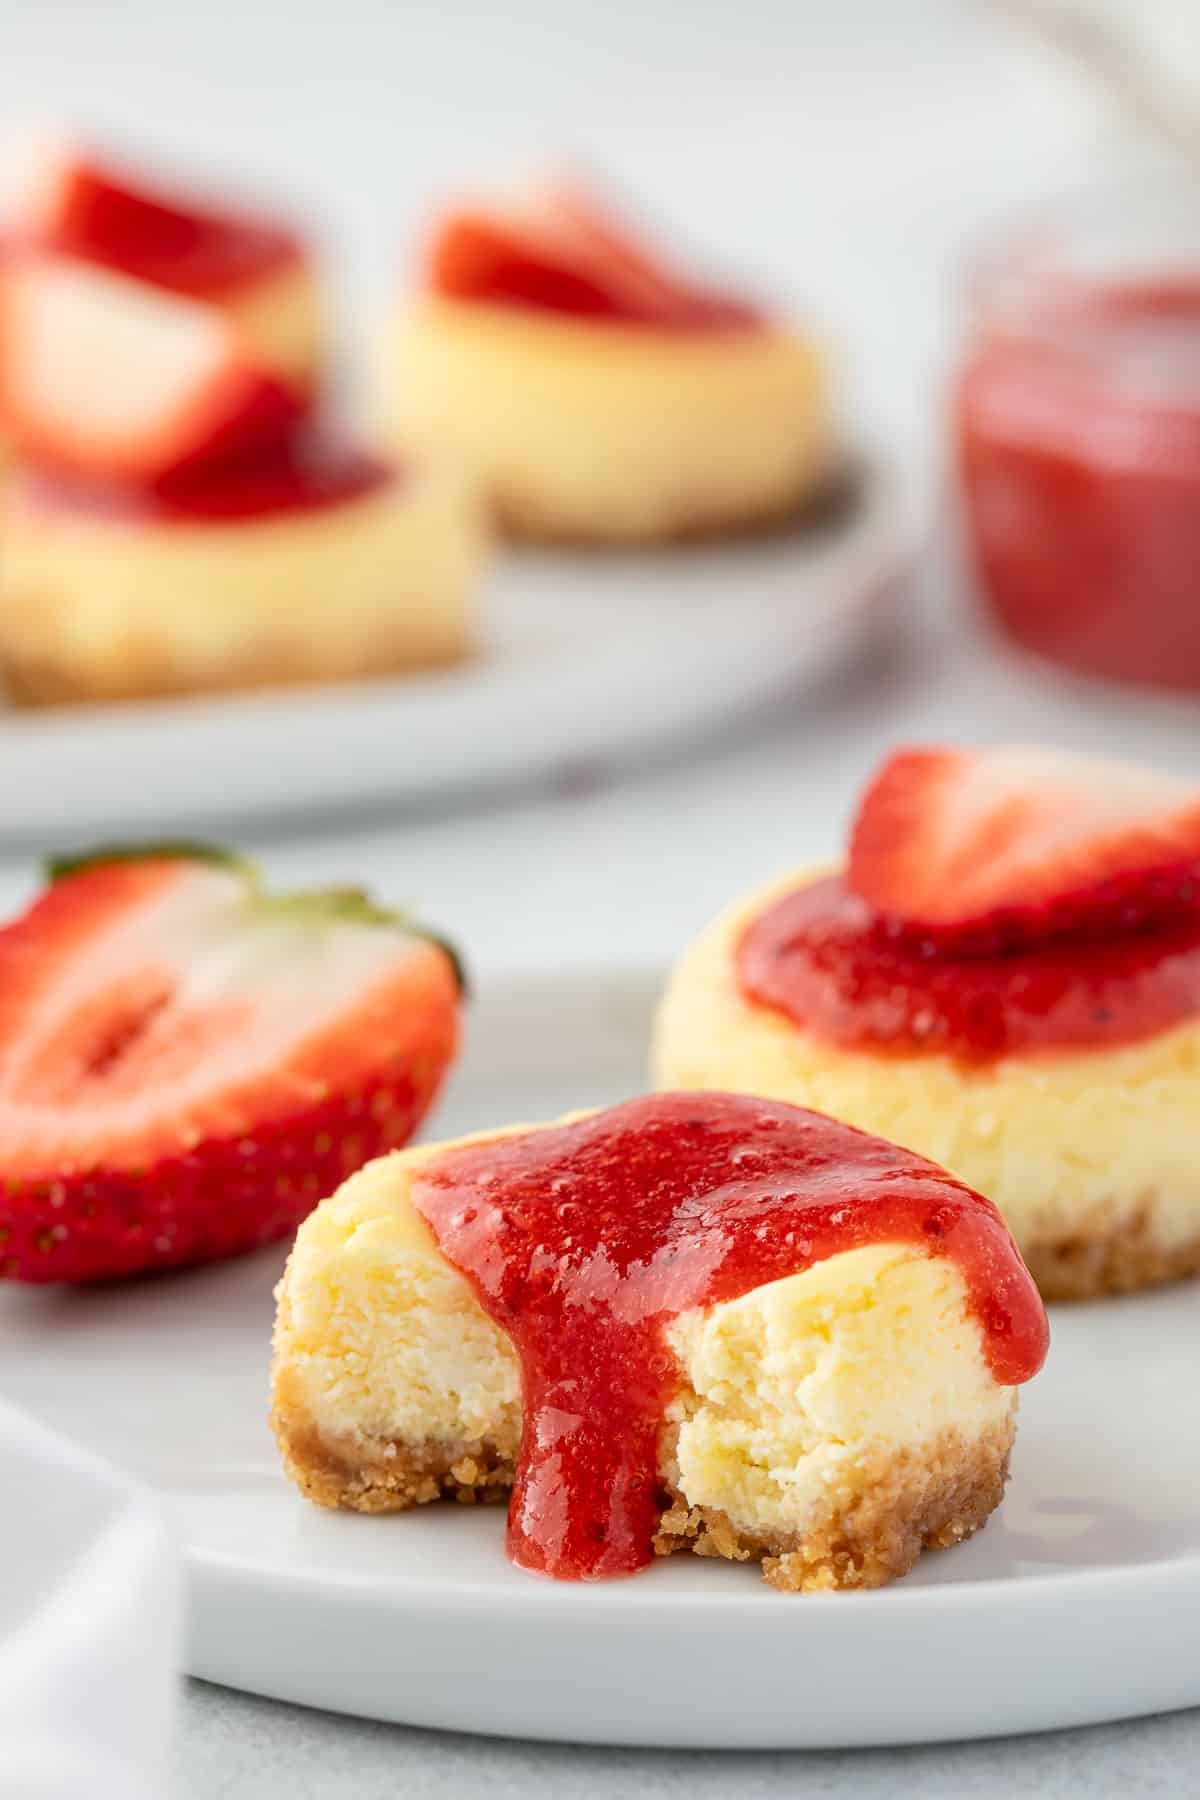 Miniature strawberry cheesecake with a bite missing and strawberry sauce dripping down the sides.